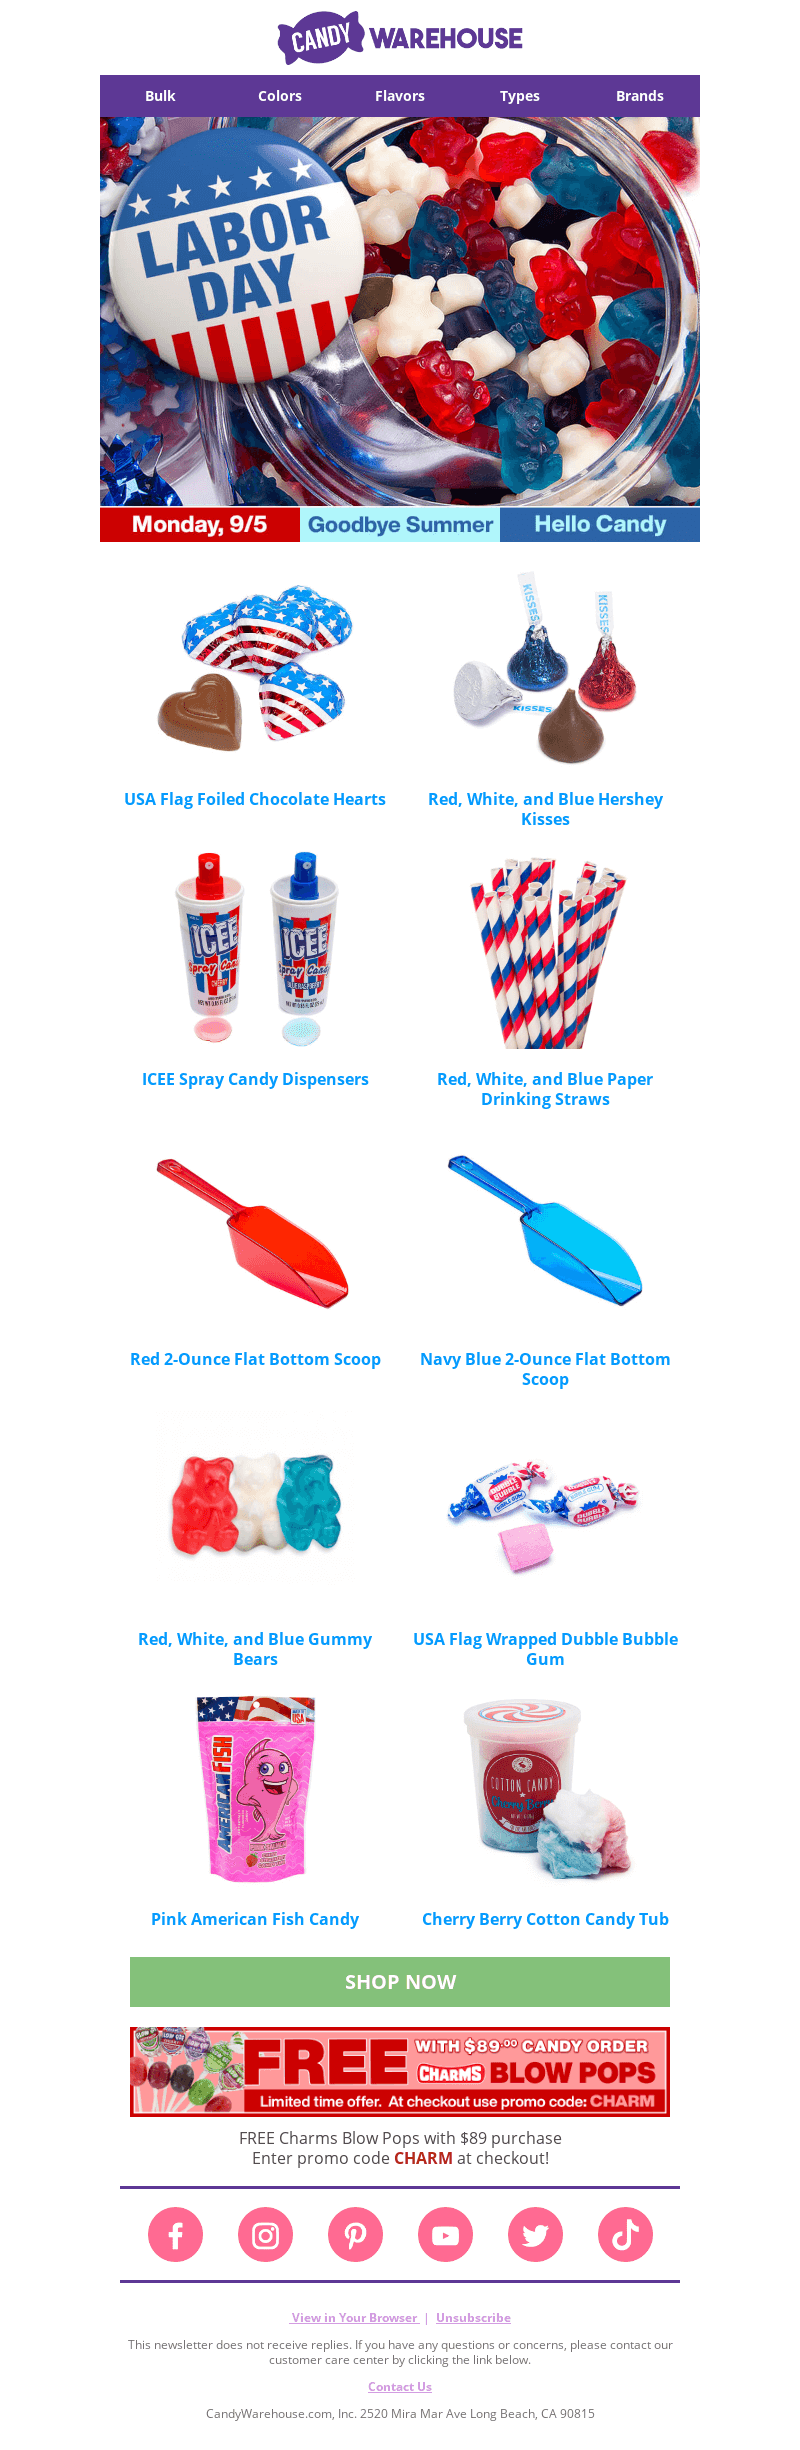 A Labor Day email from CandyWarehouse with a selection of candy and other items in the colors of the American flag